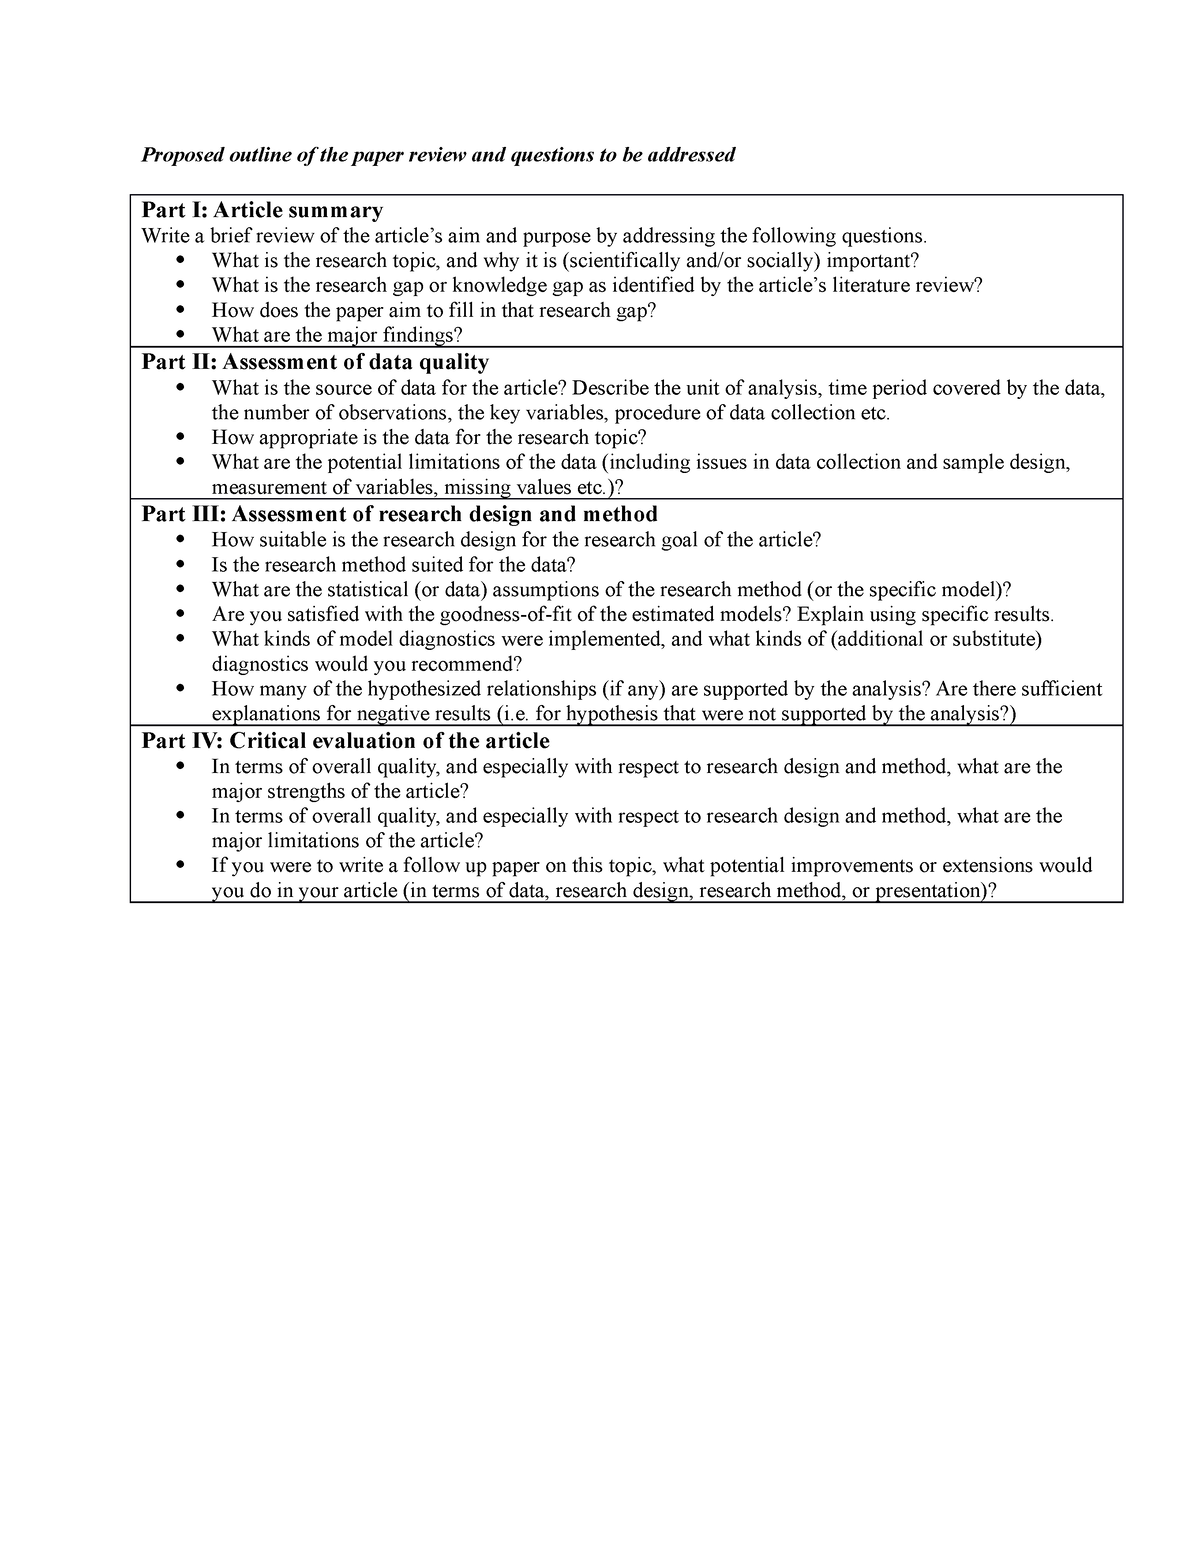 Article review Guideline - Proposed outline of the paper review and ...